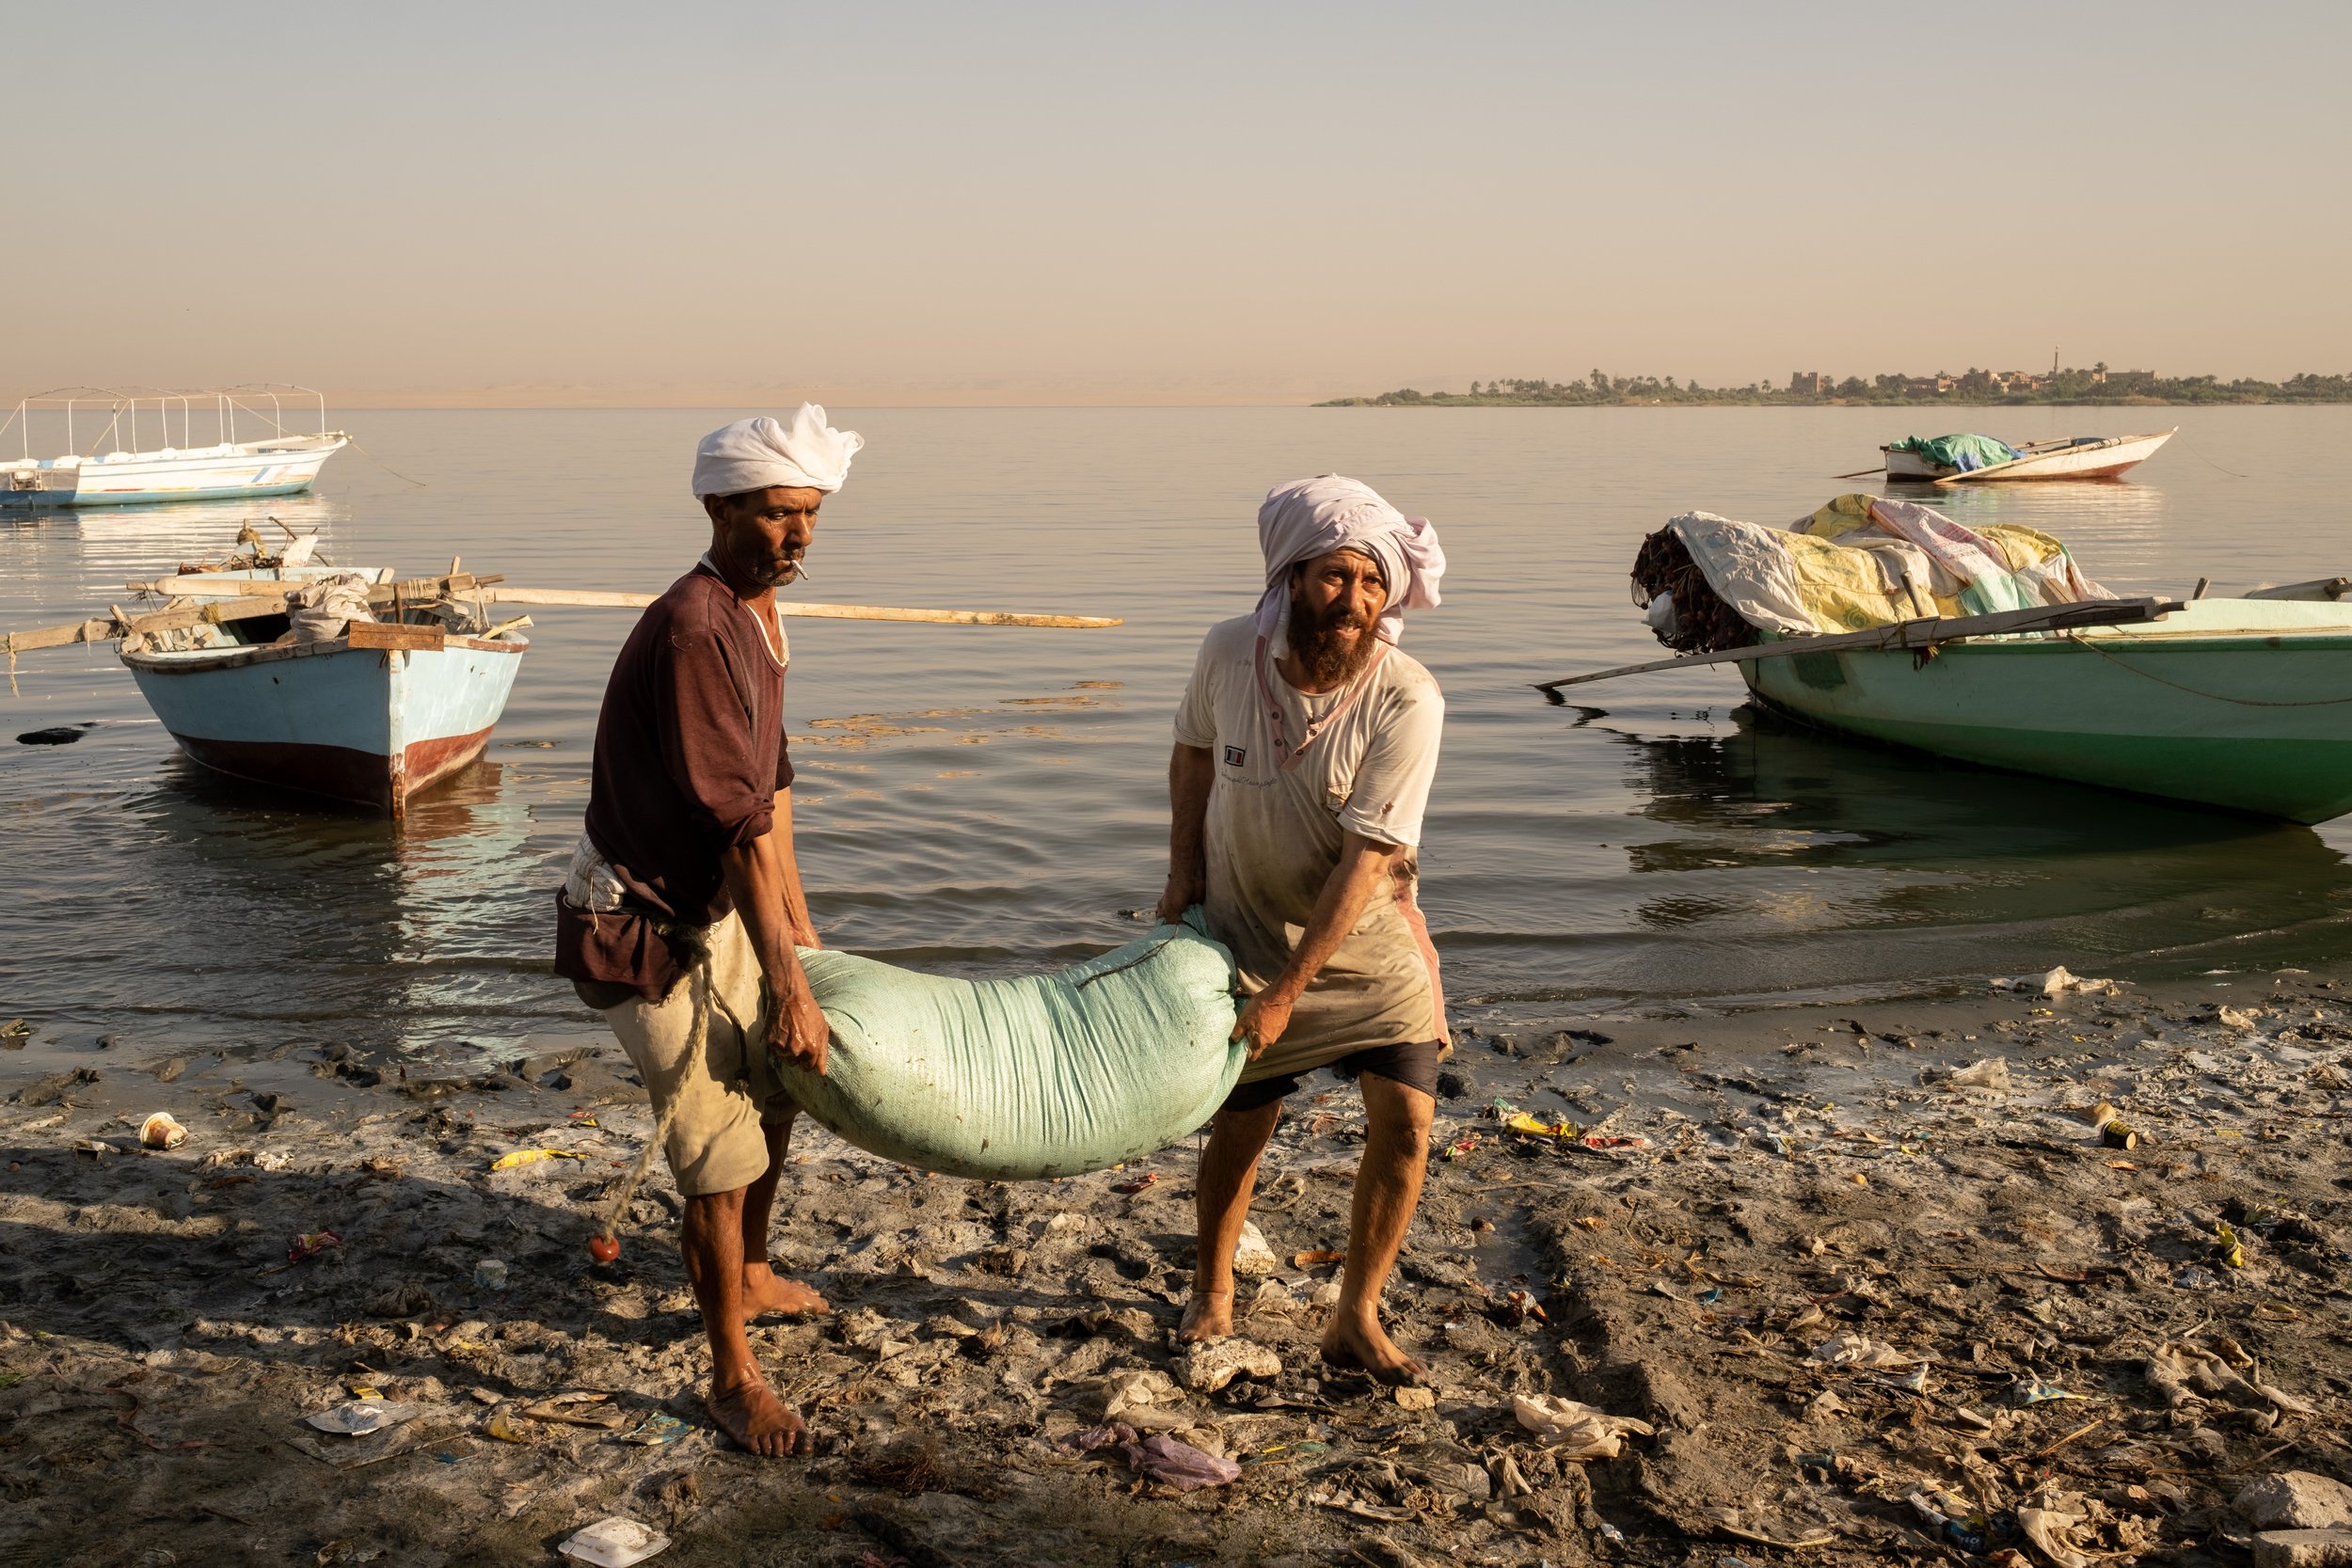 Fishermen unload their catch from Lake Qarun in the early morning. Their livelihood is threatened by overfishing, unsustainable fishing techniques, pollution, climate change, and habitat degradation.